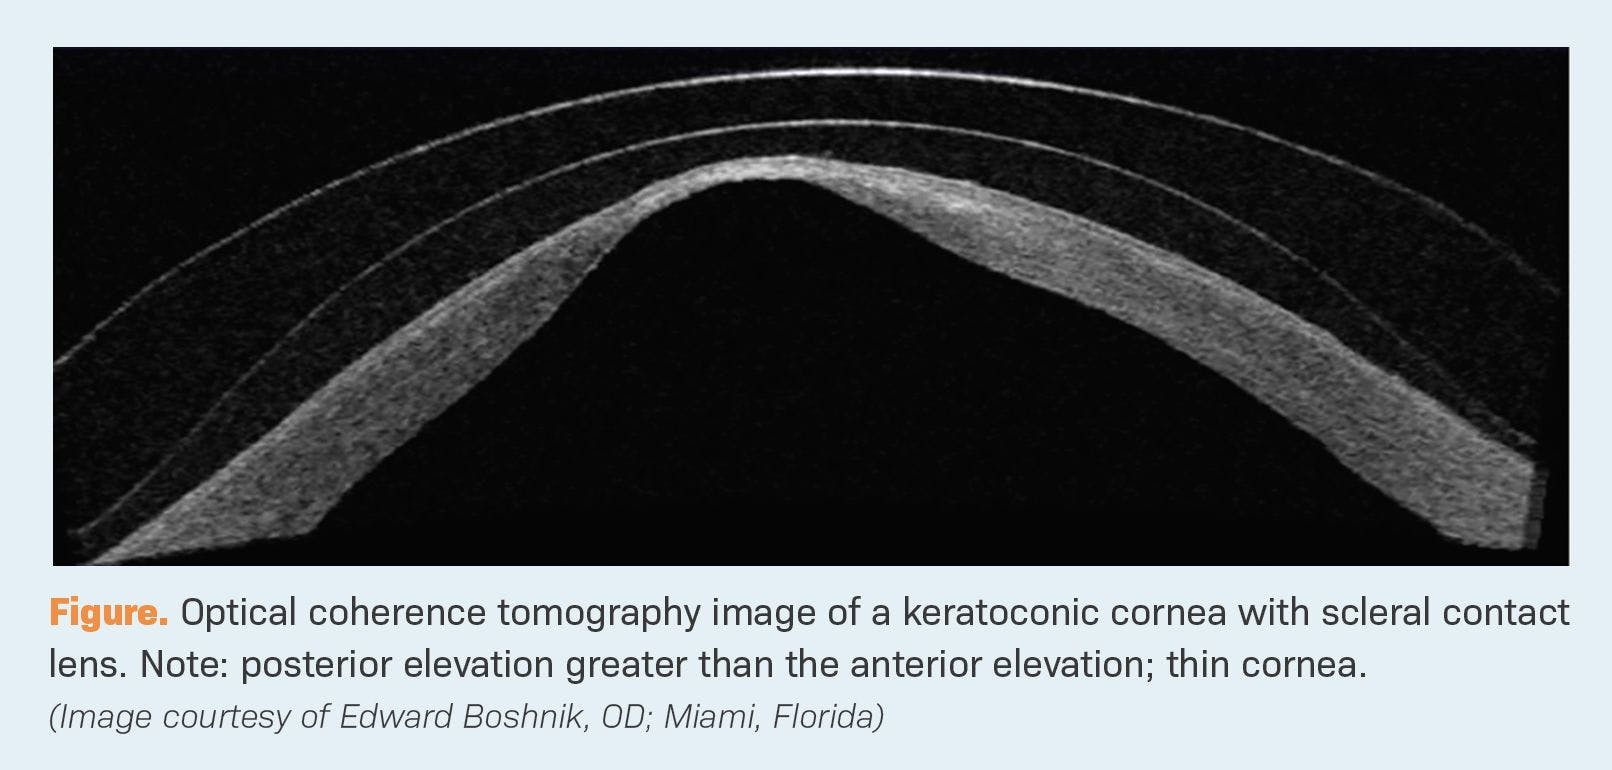 Optical coherence tomography image of a keratoconic cornea with scleral contact lens. Note: posterior elevation greater than the anterior elevation; thin cornea.